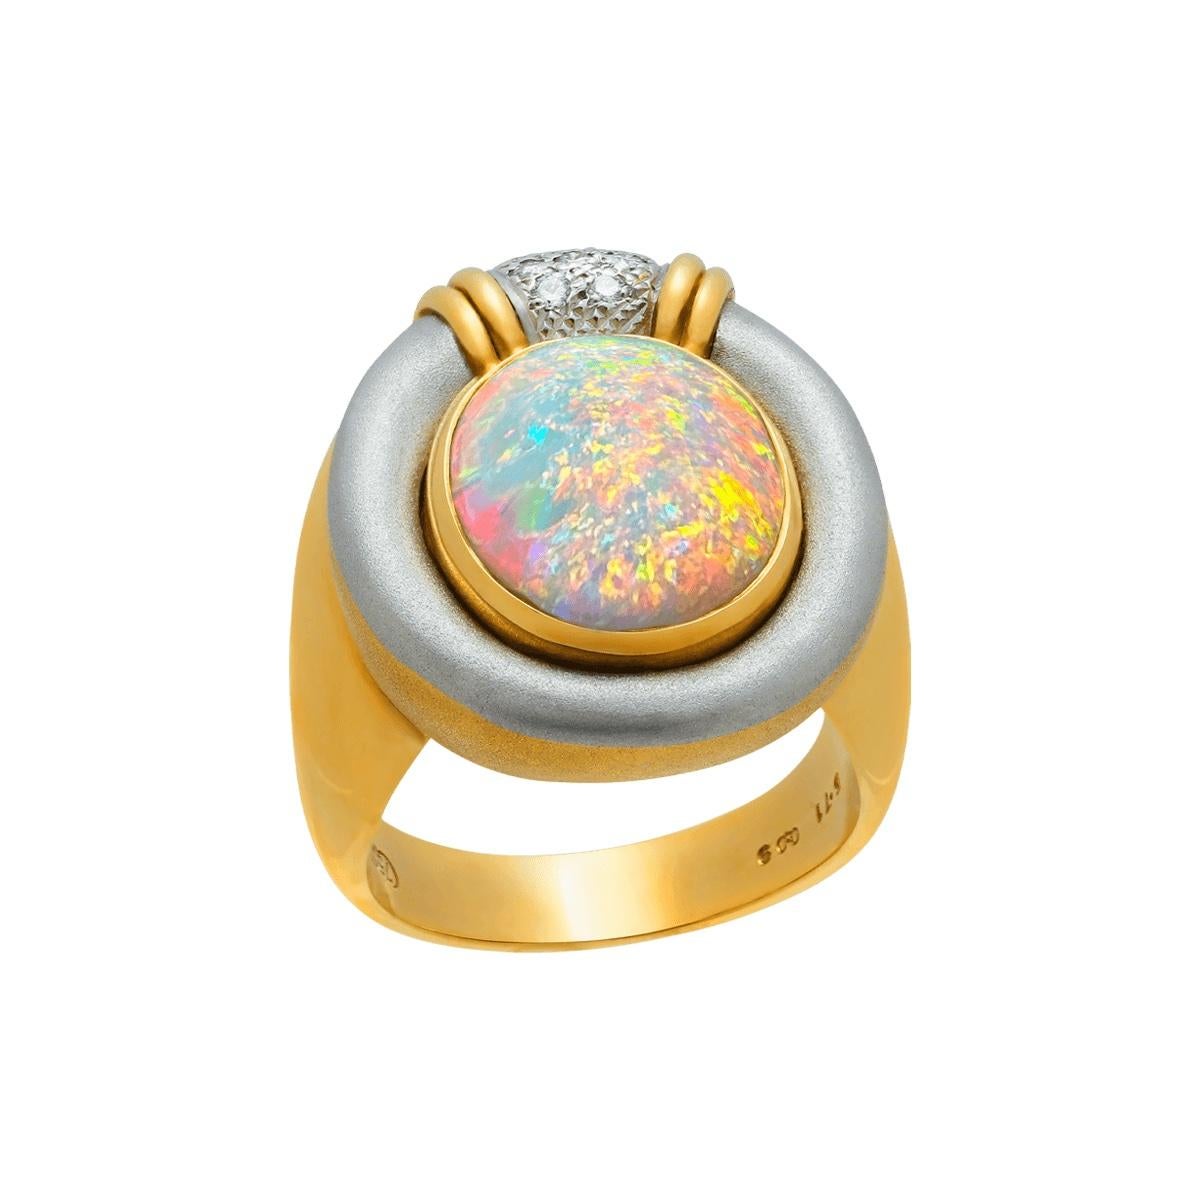 What a beautiful opal this is. A magical stone of oranges and greens, reds and blues, it sparkles brightly from every direction. Some opals have a flat spot of colour known as a window, but not this stone. Even from underneath the ring, it shines.